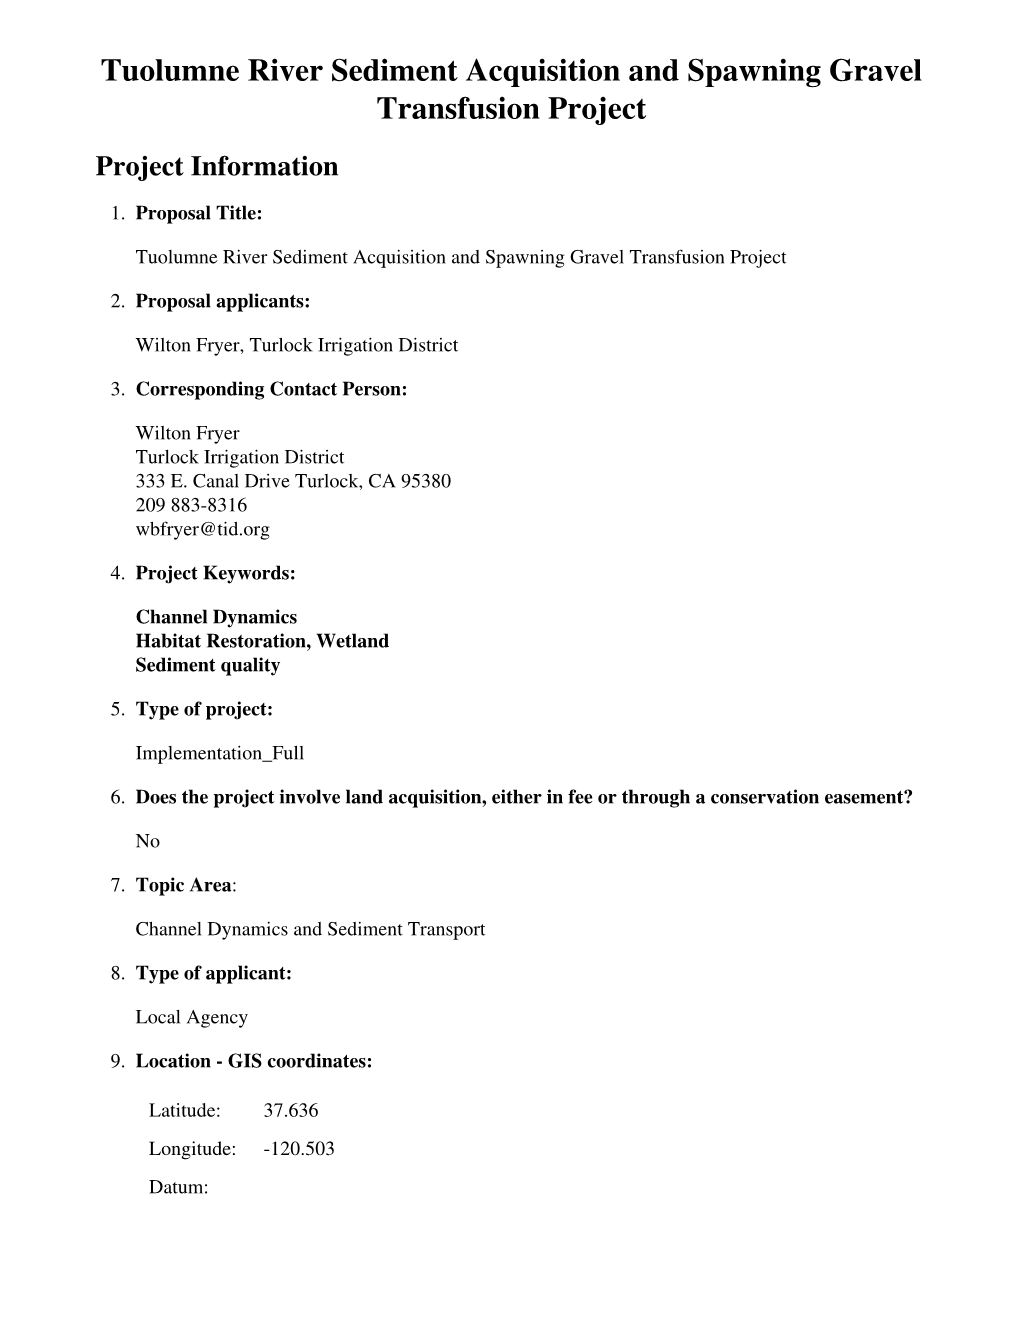 Tuolumne River Sediment Acquisition and Spawning Gravel Transfusion Project Project Information